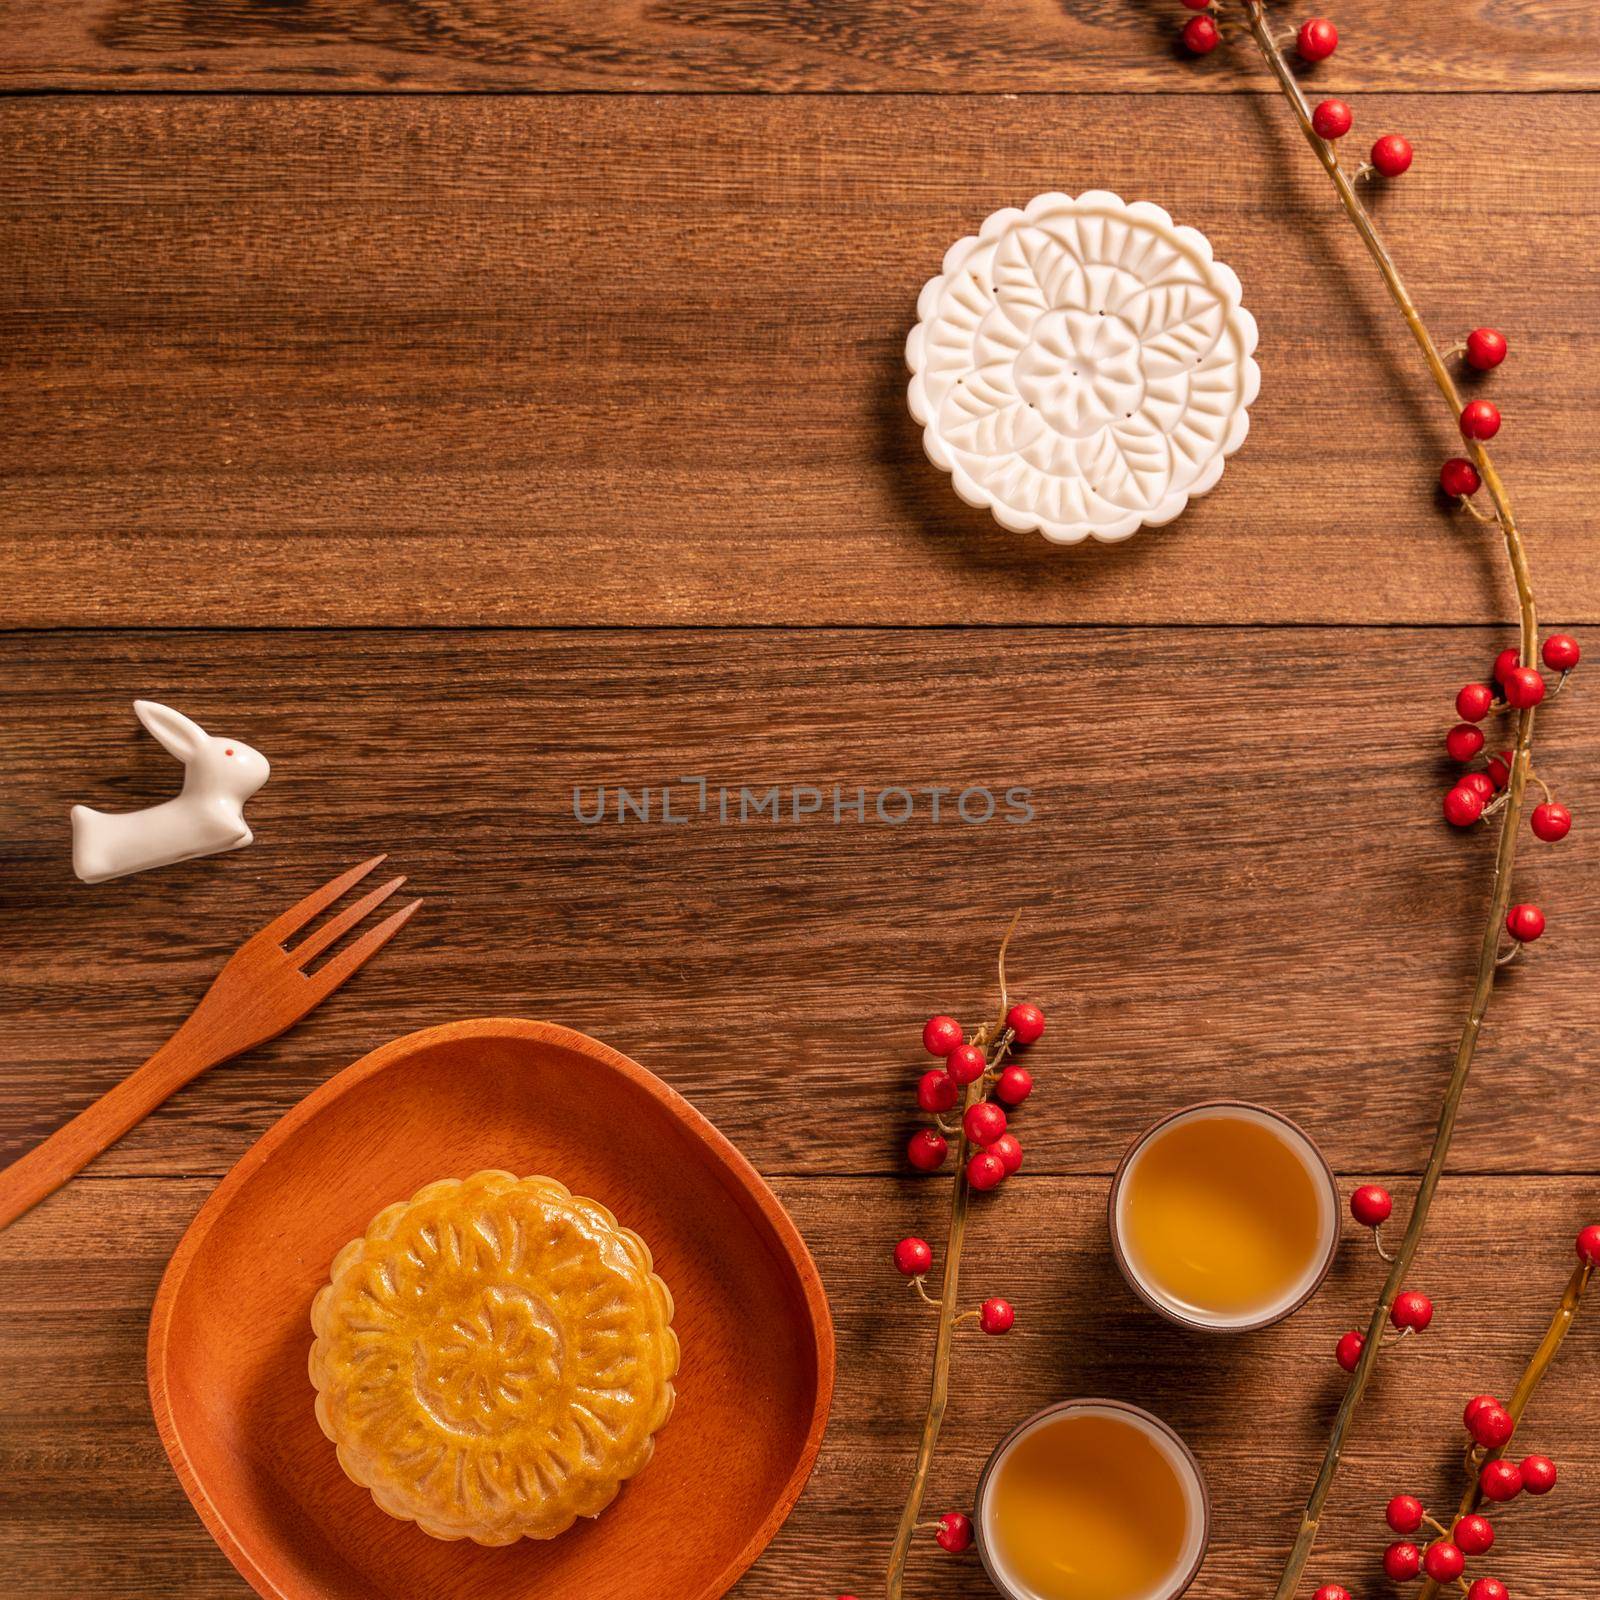 Creative Moon cake Mooncake table design - Chinese traditional pastry with tea cups on wooden background, Mid-Autumn Festival concept, top view, flat lay.